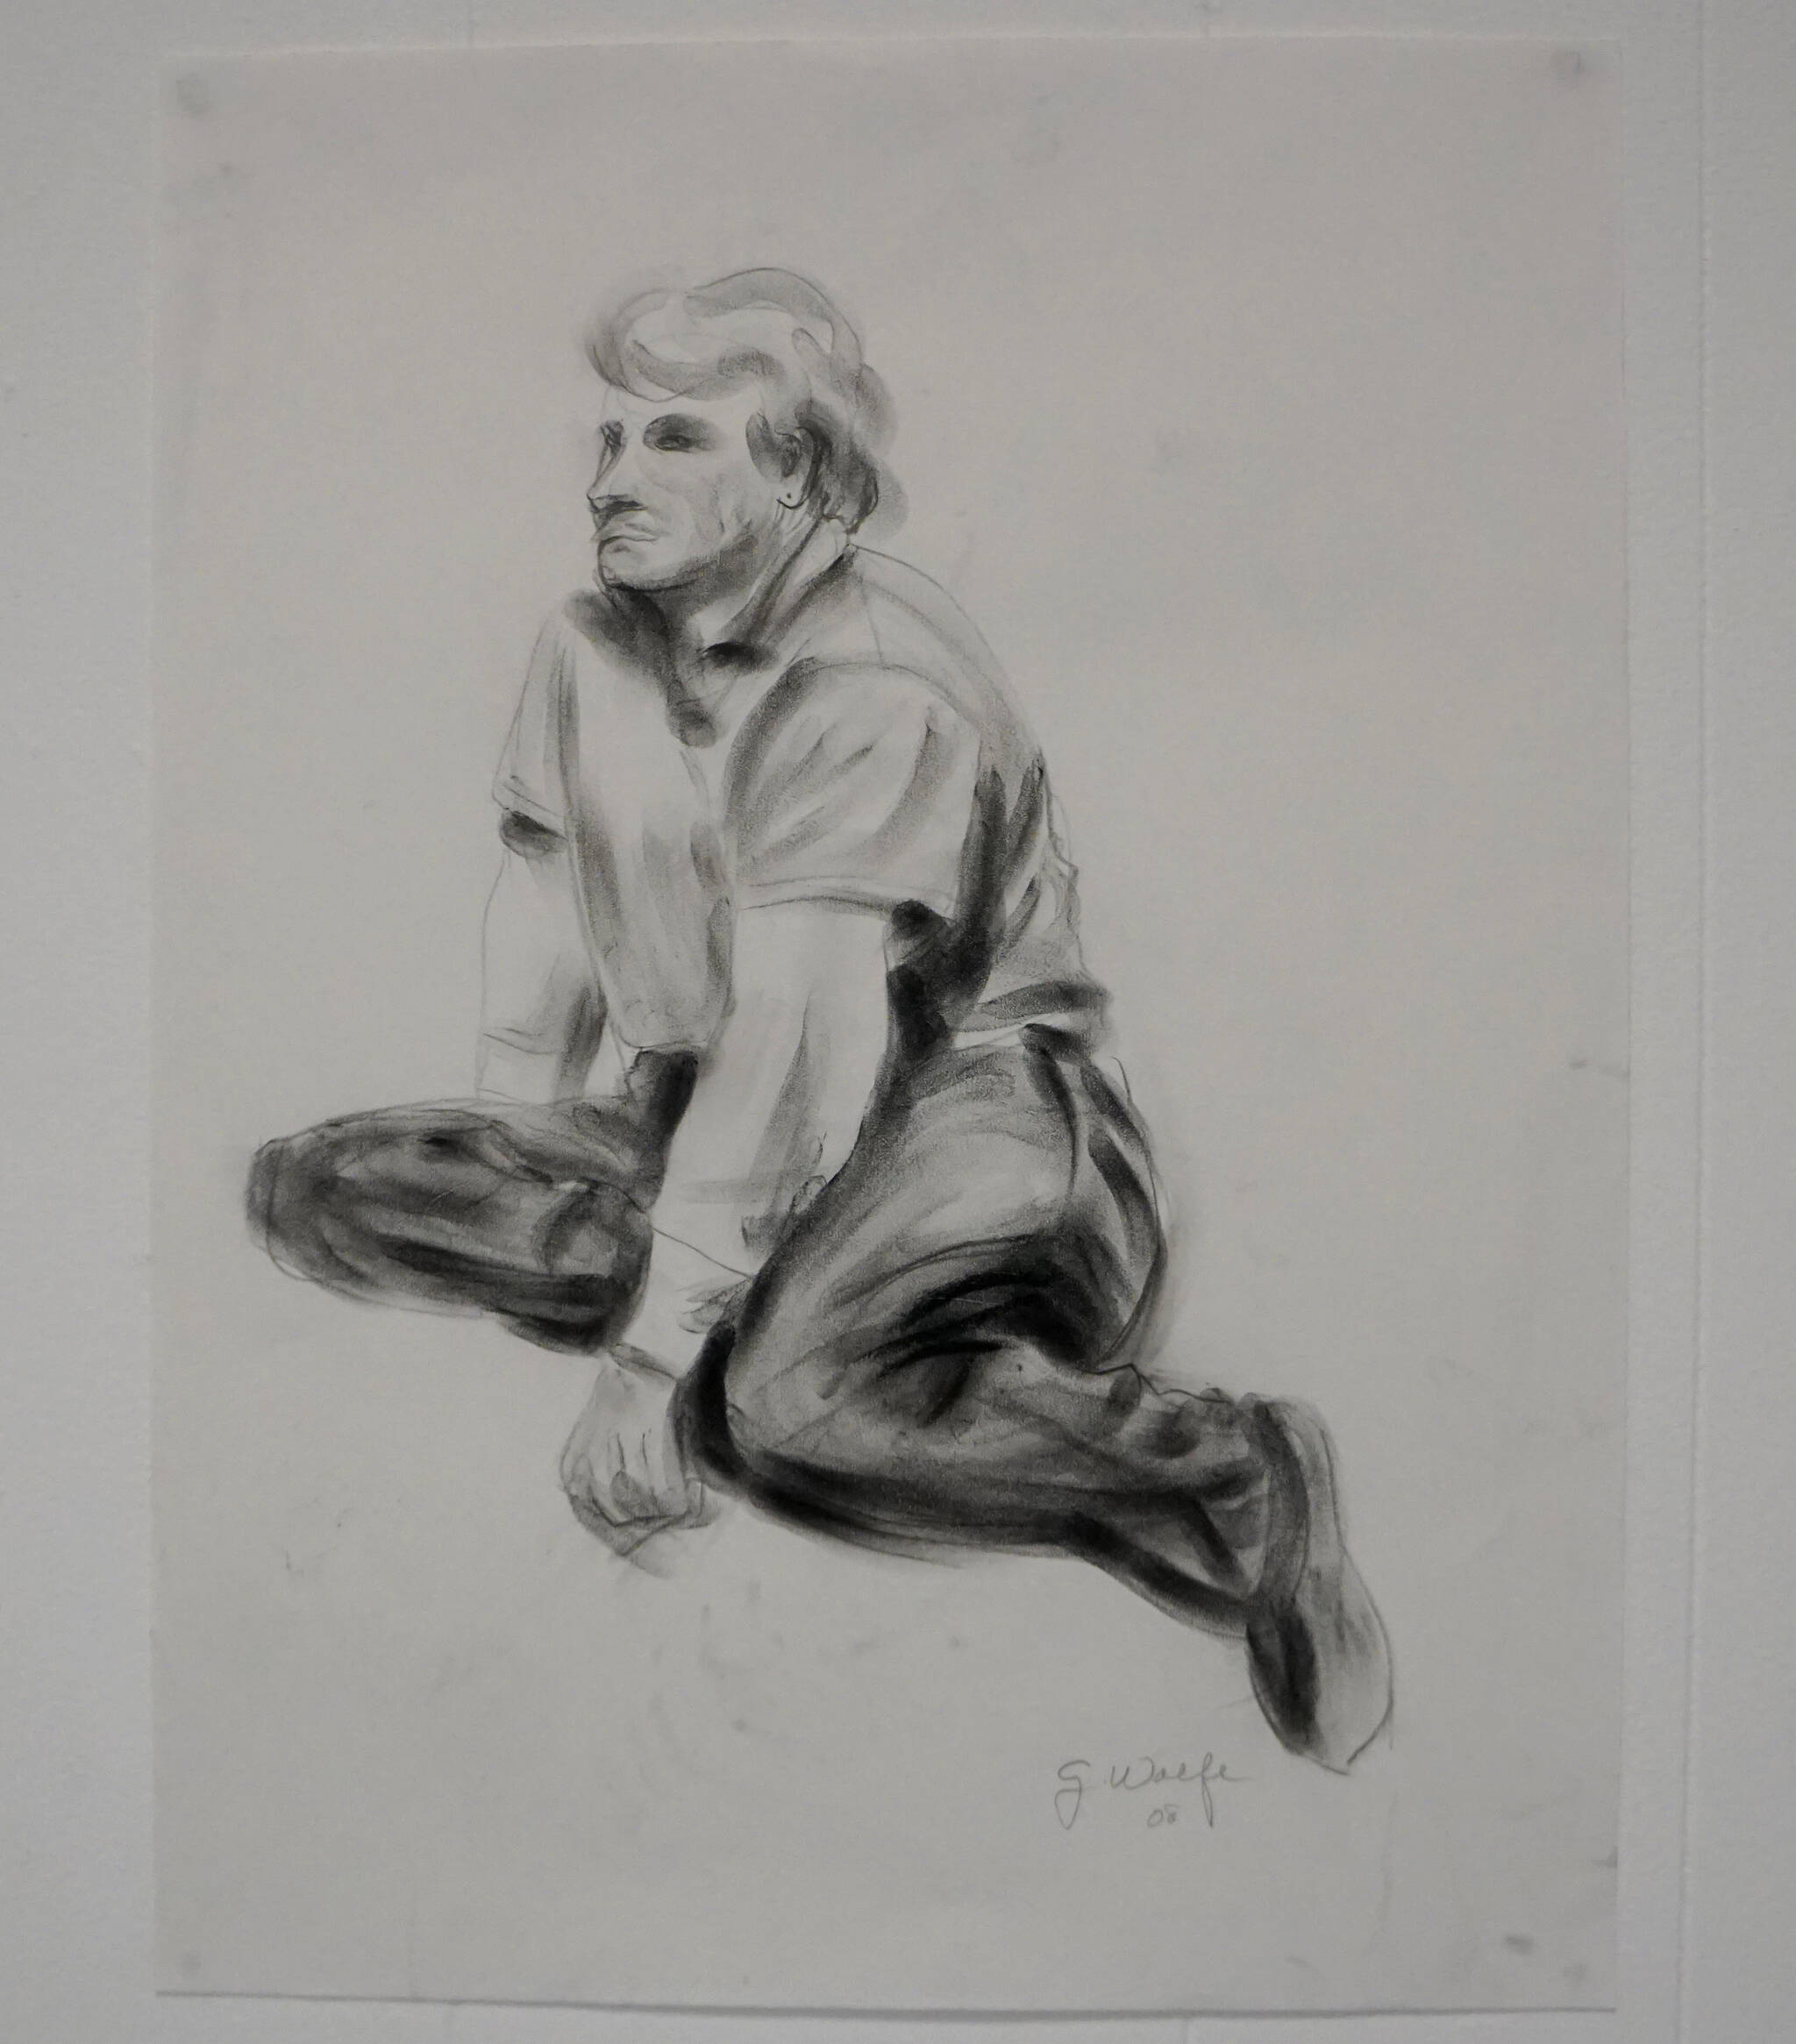 "Selected Works and Sketches by Gaye Wolfe," showing at the Homer Council on the Arts through March, include a sketch of her partner, Sam Smith, part of a series of life drawings she did. (Photo by Michael Armstrong/Homer News)